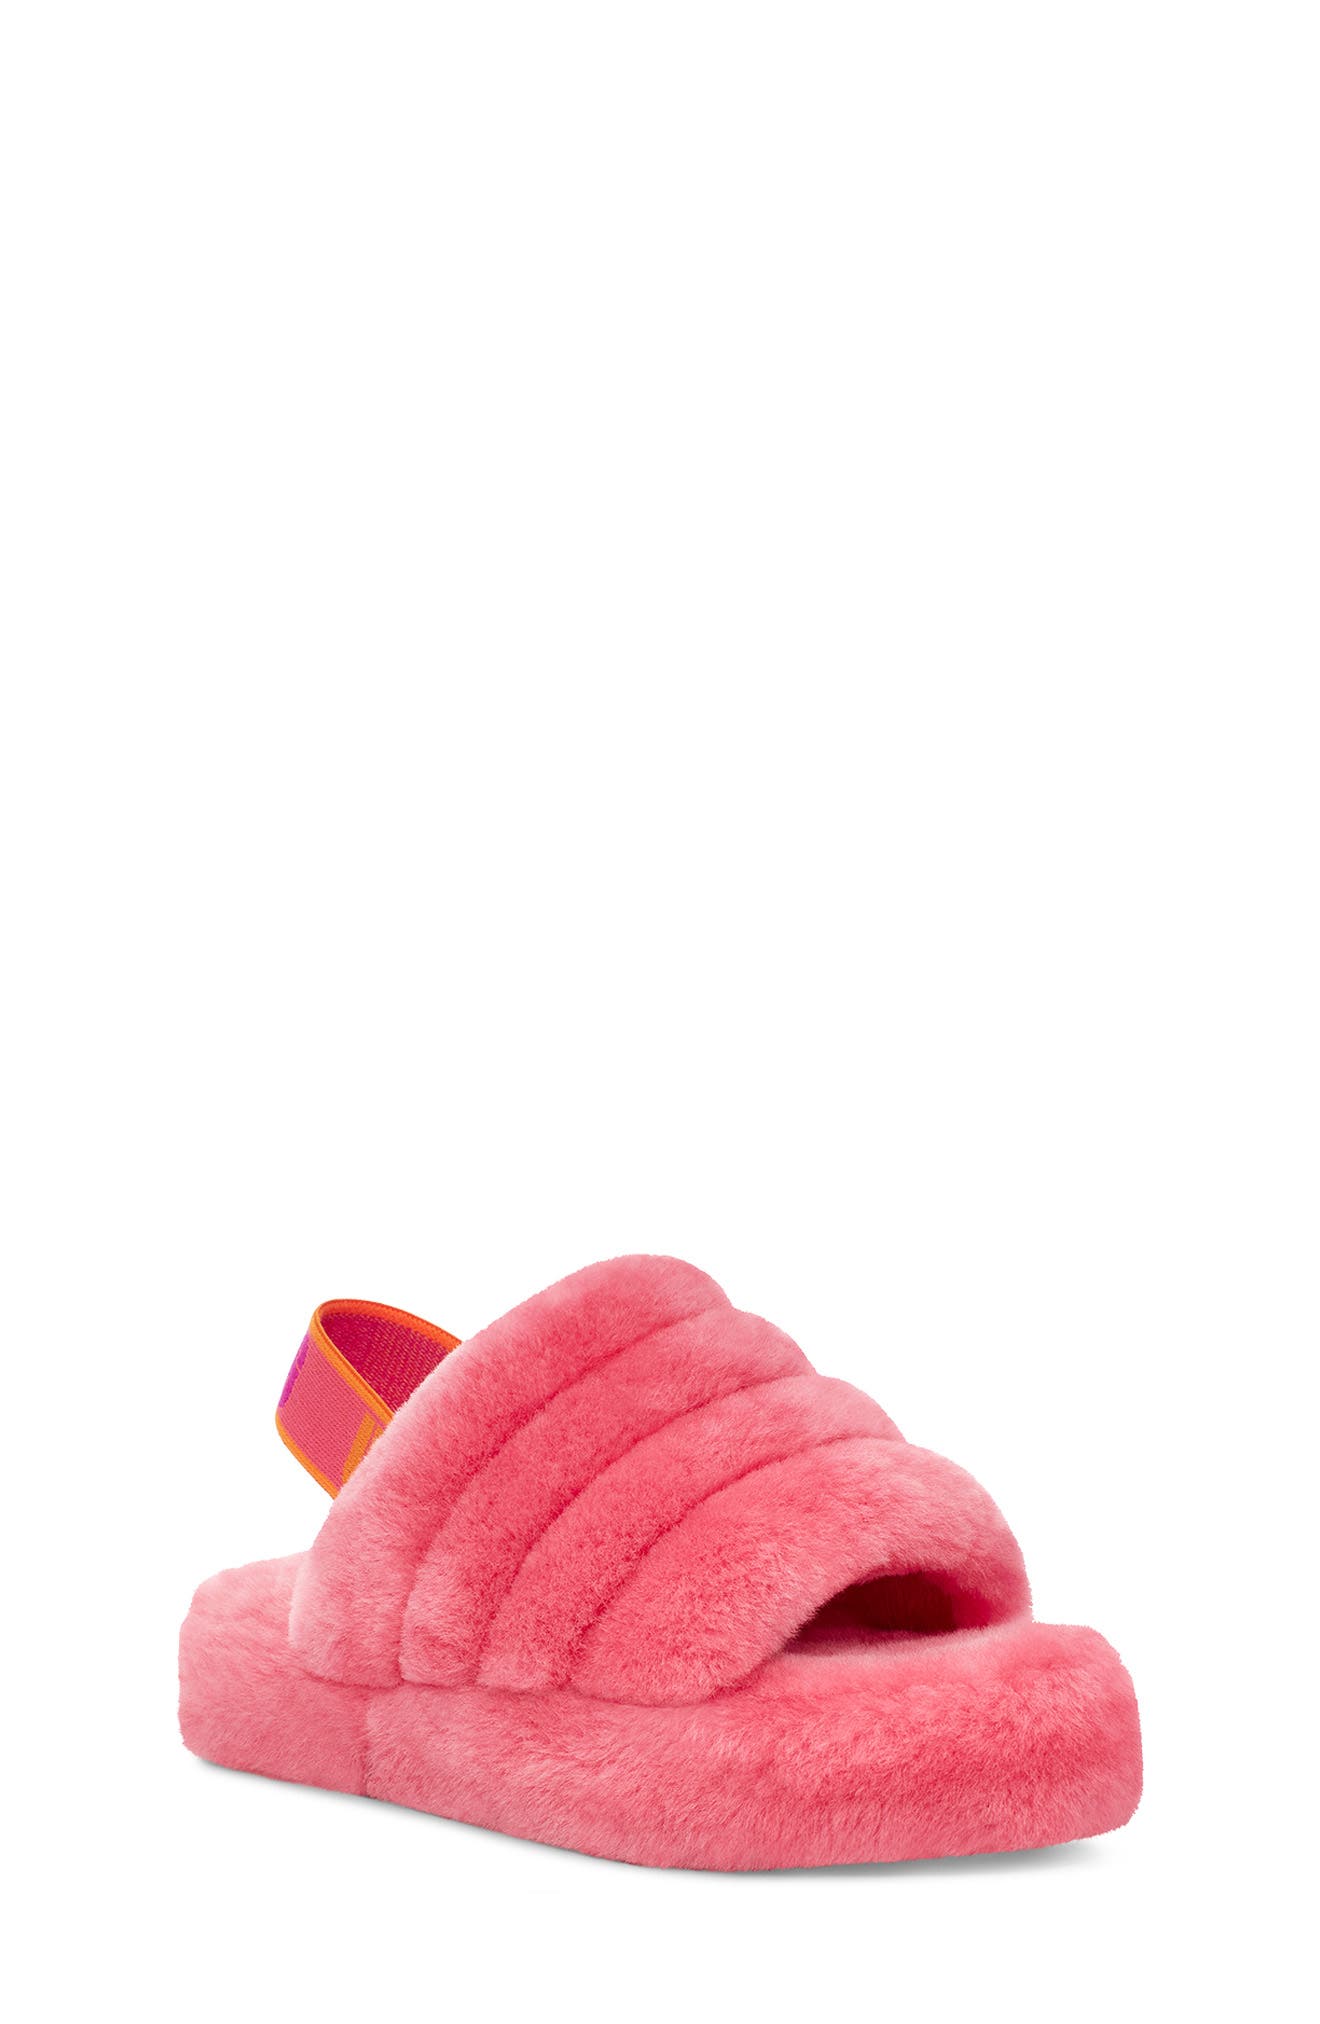 kids pink ugg slippers